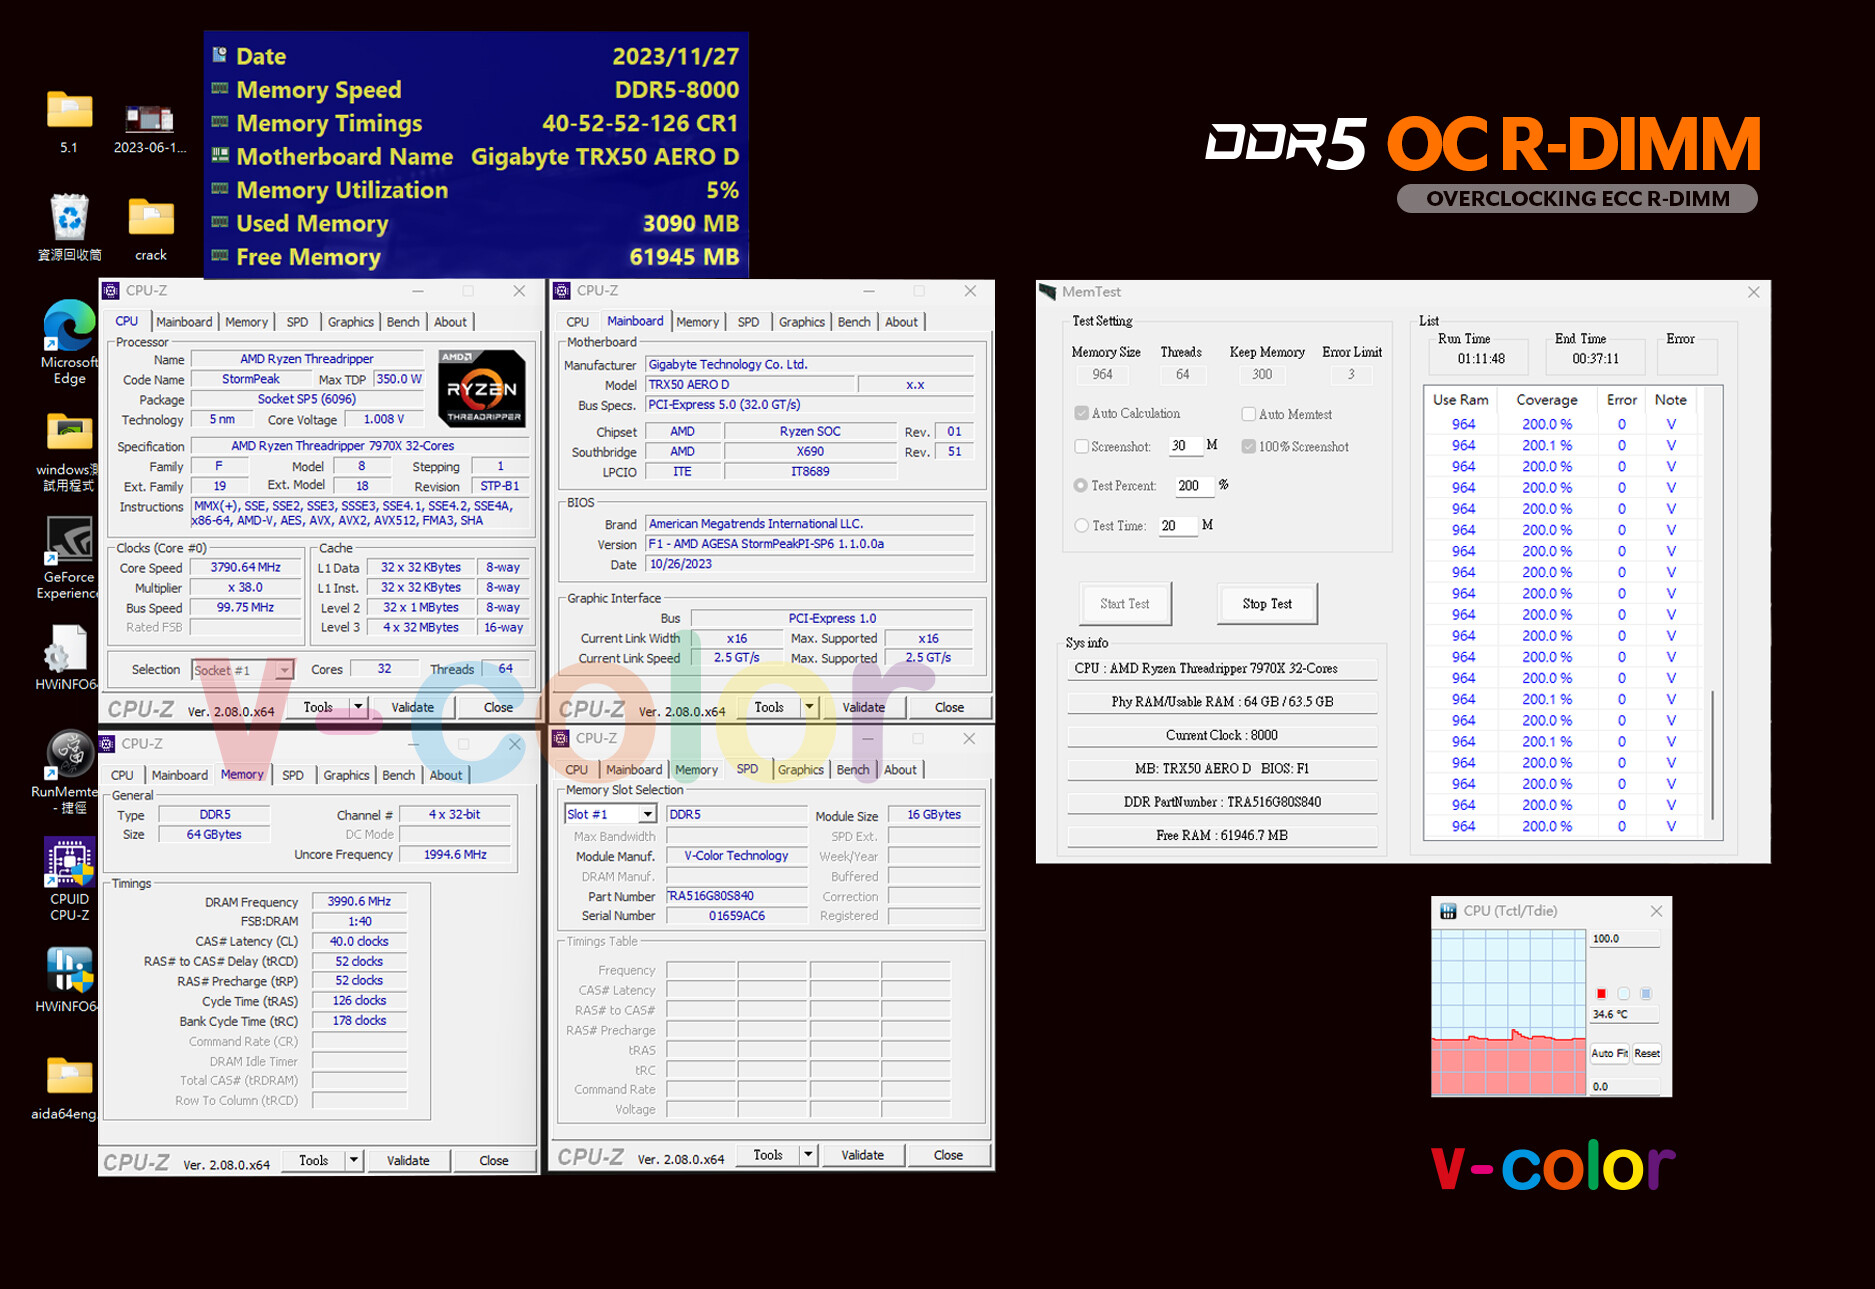 On the TRX50 AERO D, V-COLOR successfully overclocks DDR5-8000 RDIMM.